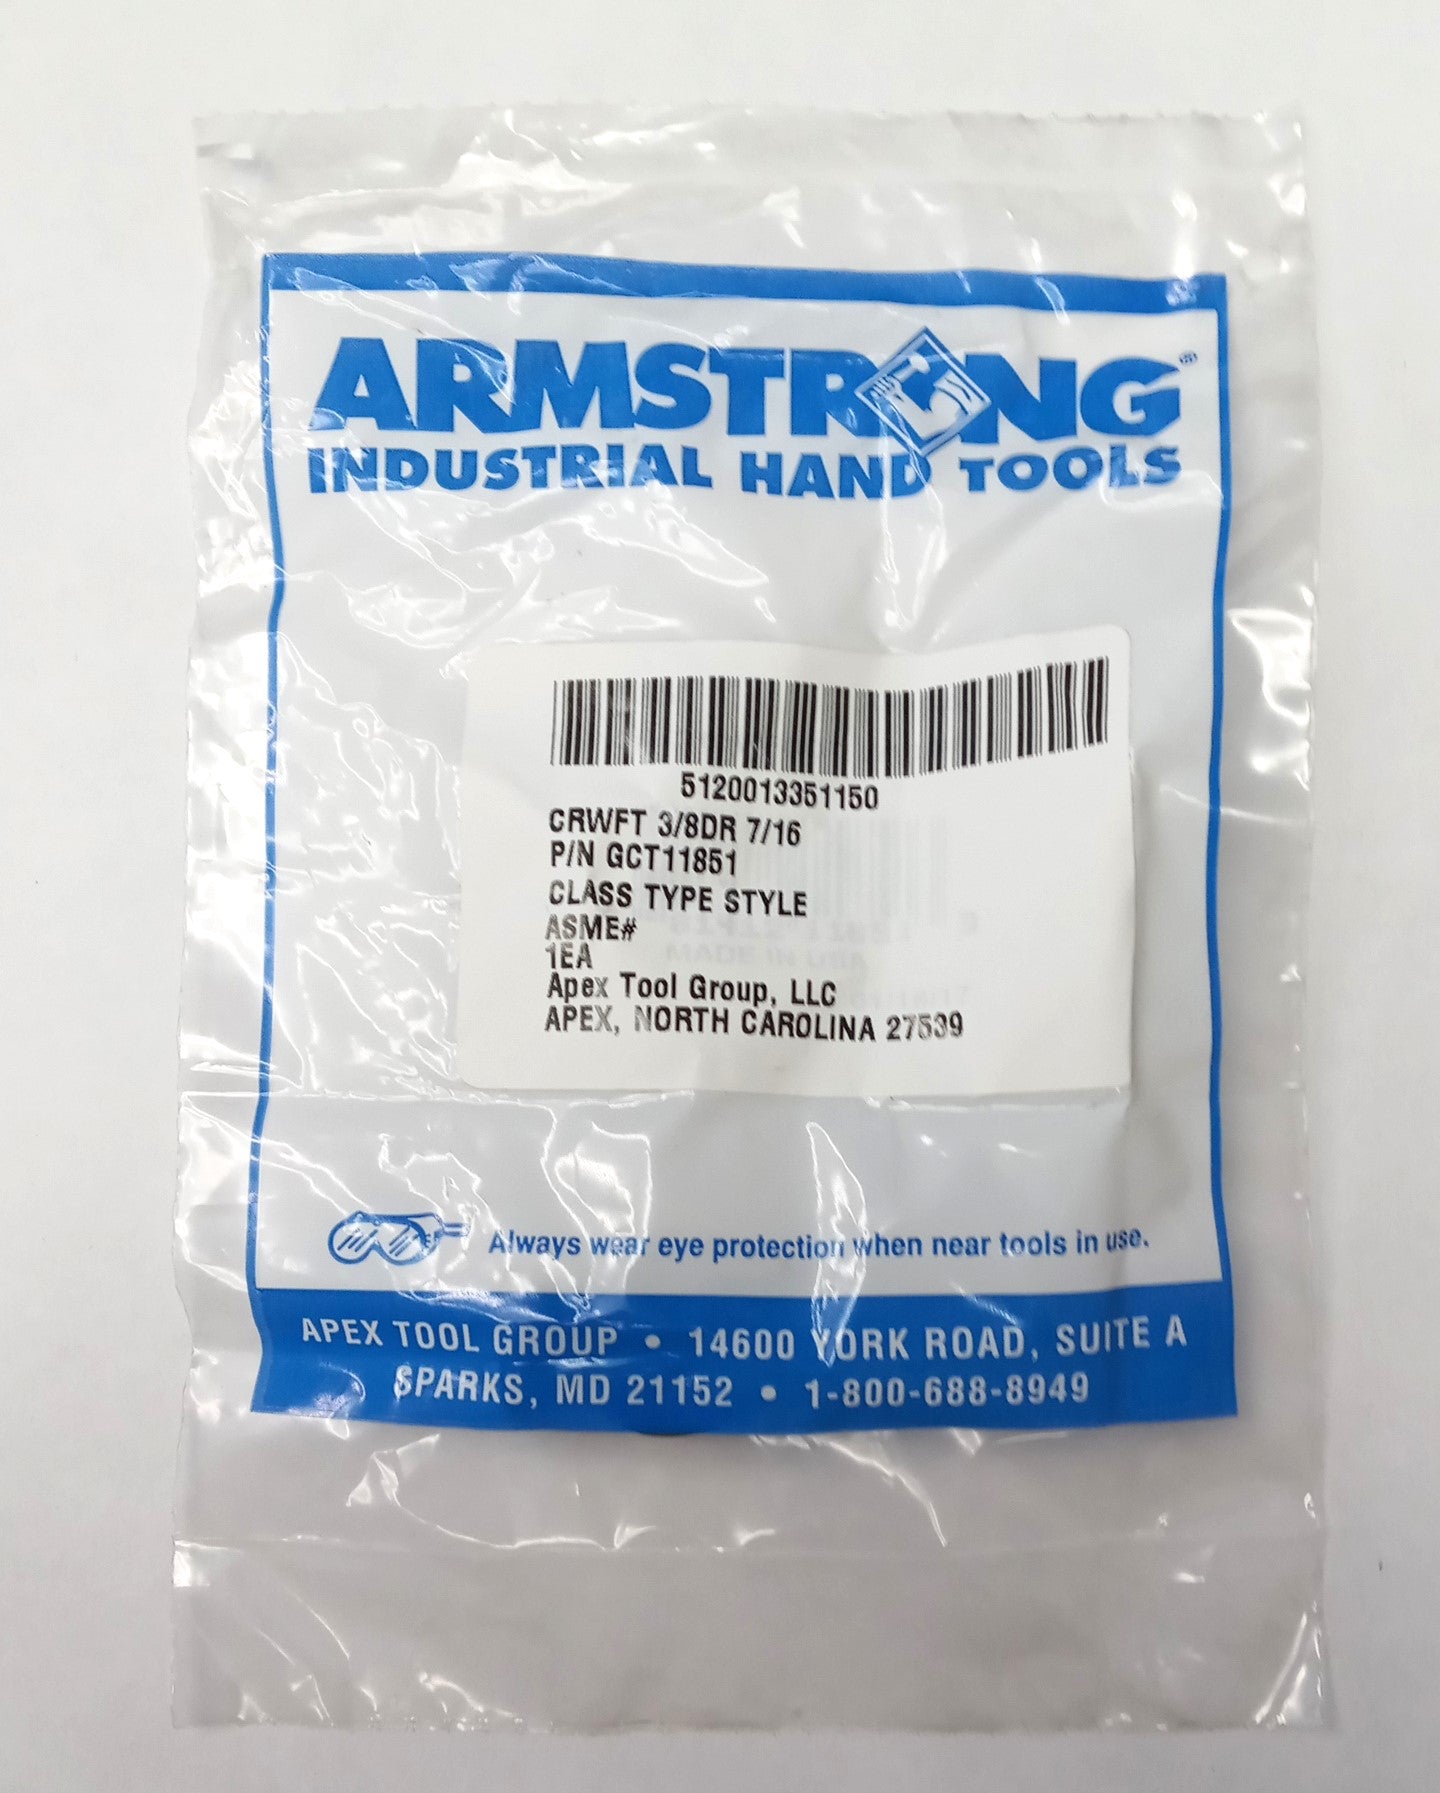 Armstrong Tools 11-851 7/16" SAE Open-End Crowfoot Wrench - 3/8" Drive USA